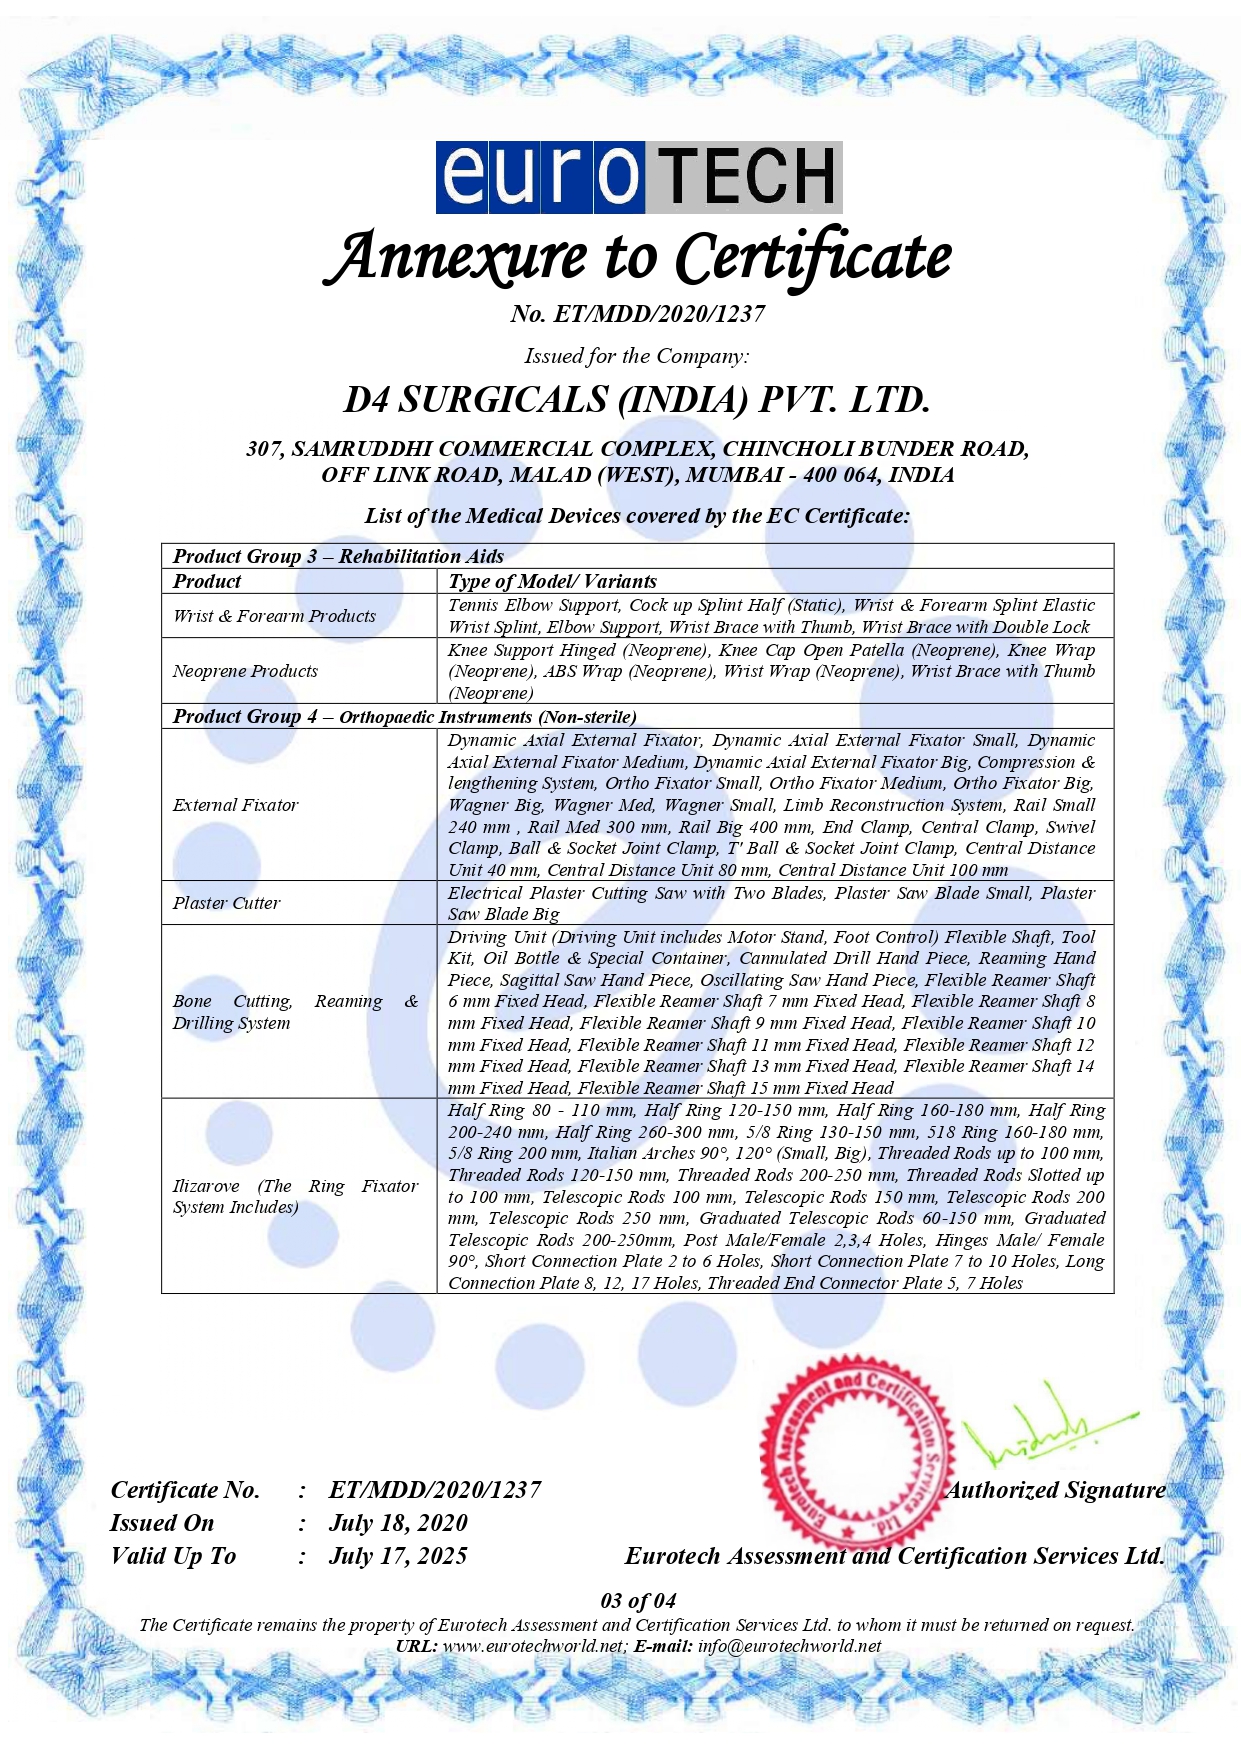 Annexure to certificate 2020-1237 - product grp-3.jpg